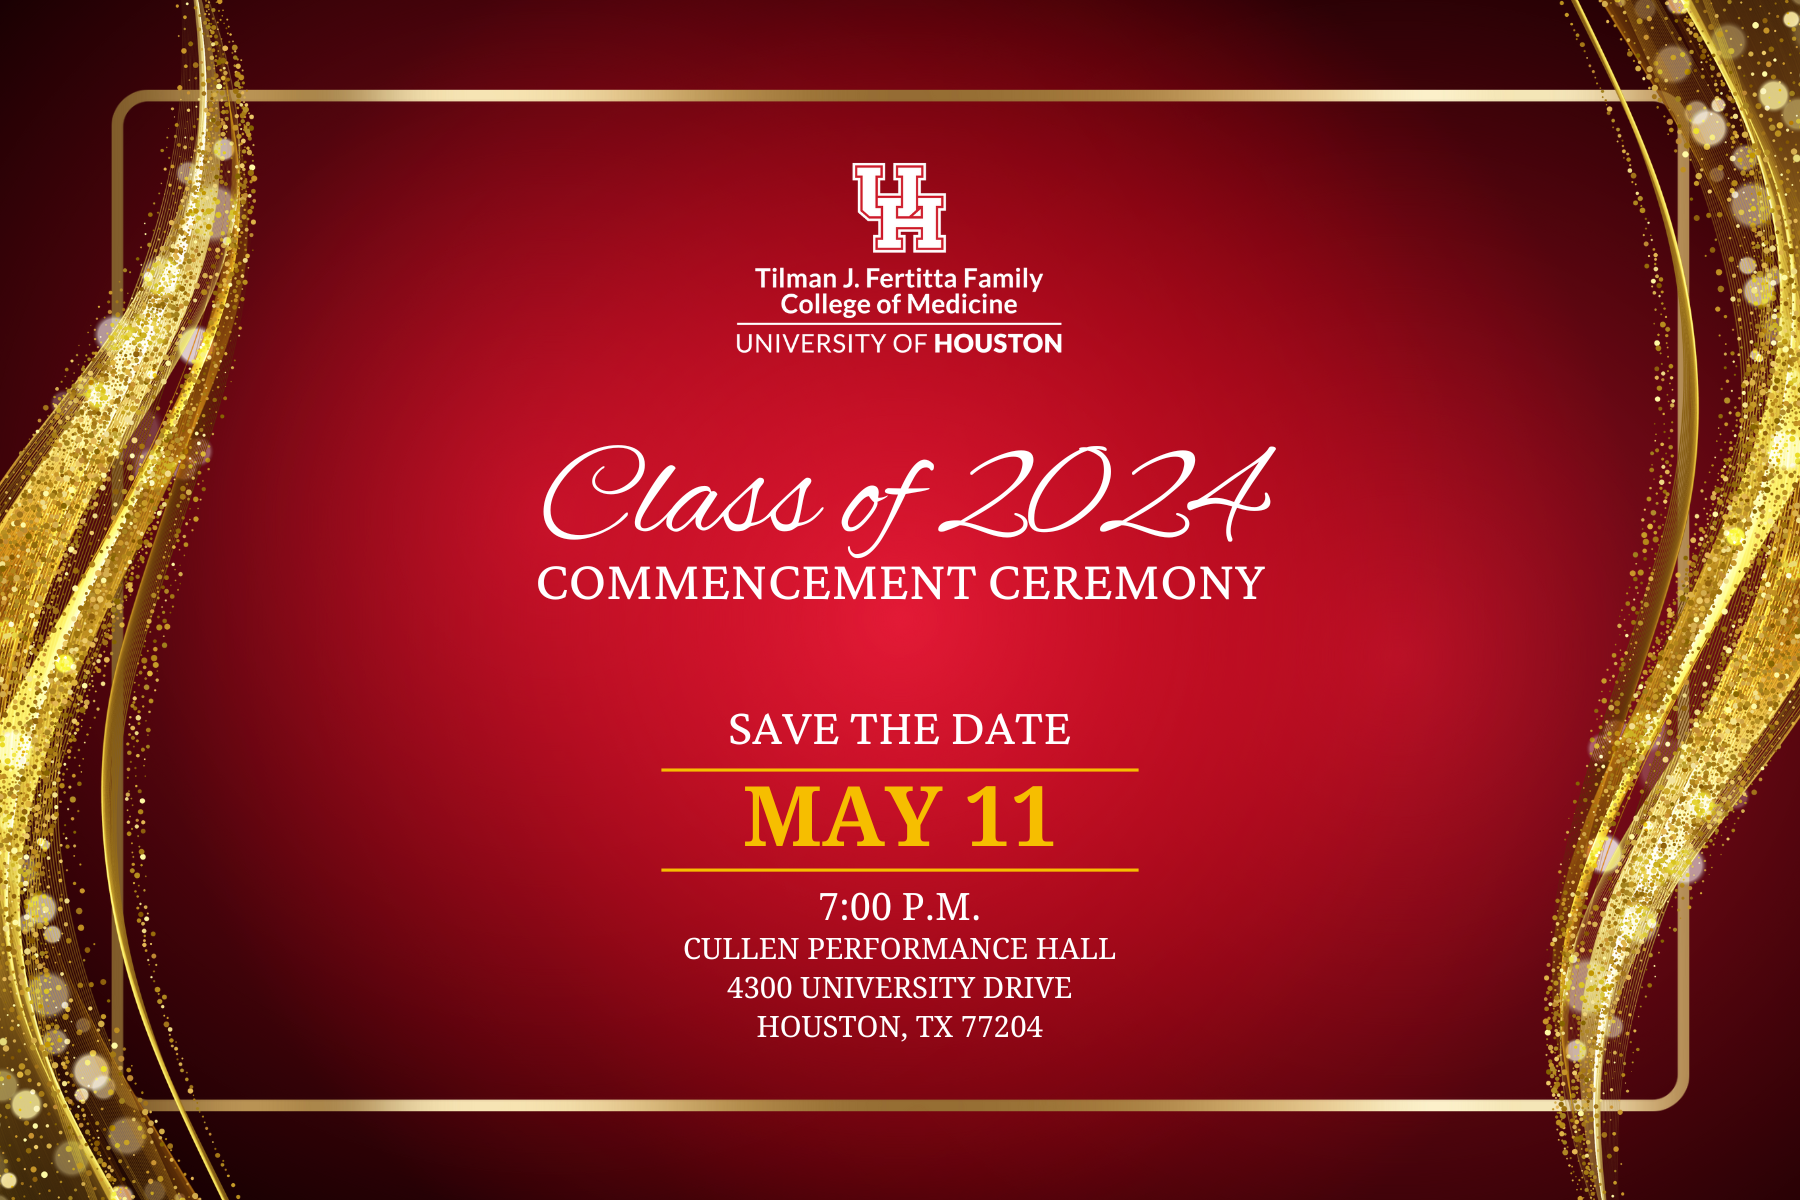 Class of 2024 Commencement Ceremony May 11, 2024 at 7 P.M. in the Cullen Peformance Hall 4300 University Drive, Houston, TX 77204